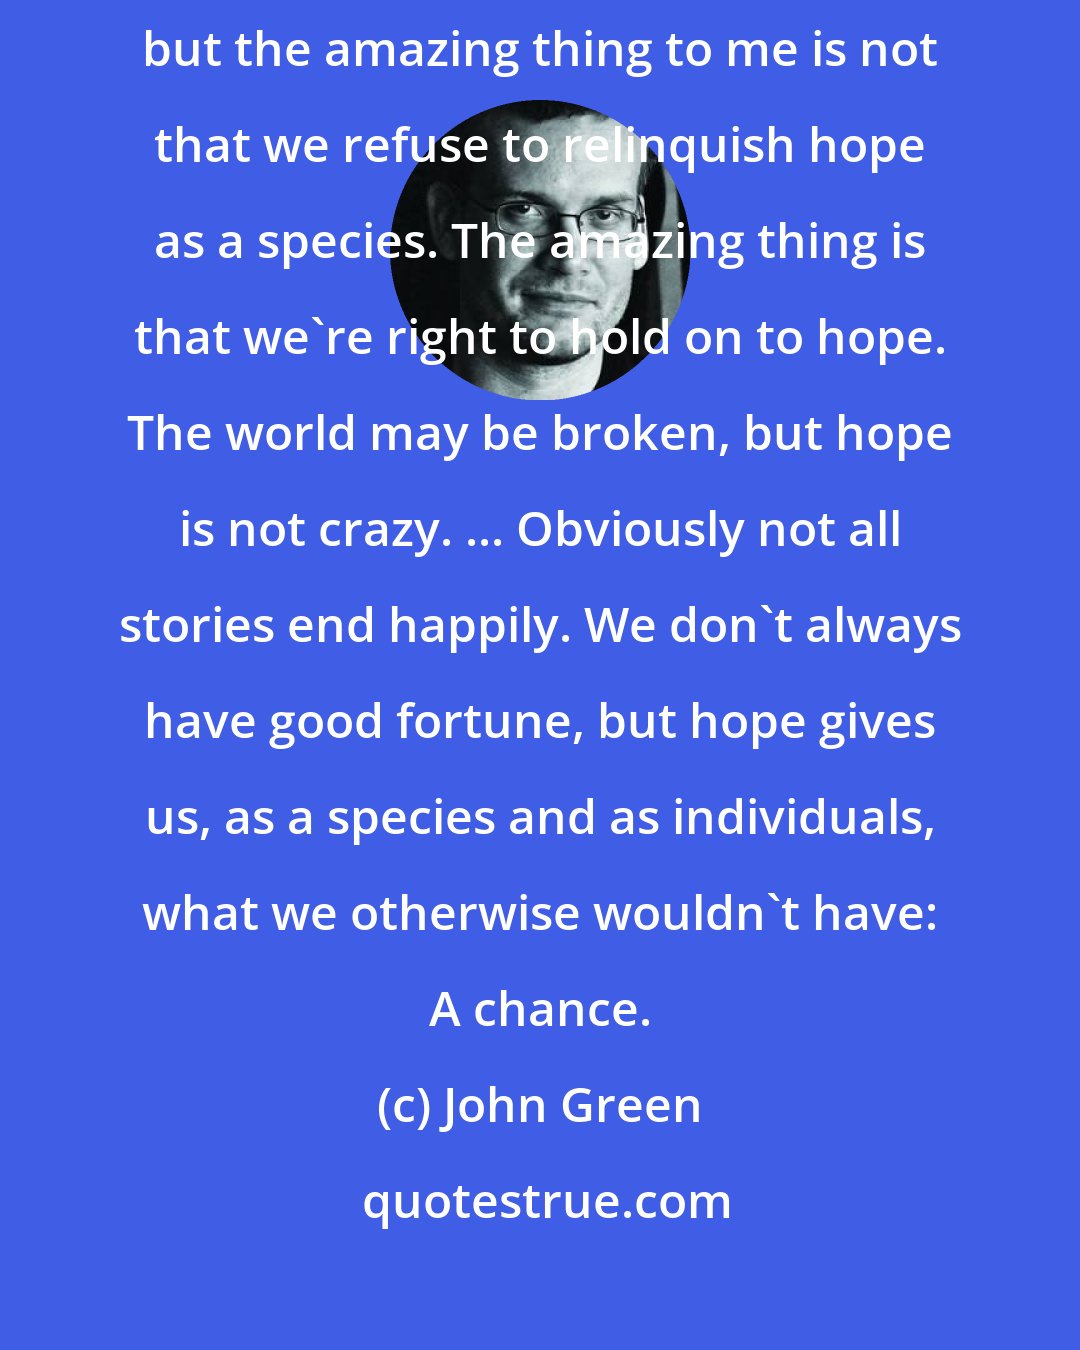 John Green: We live in this irreparably broken world, and I don't wish to deny reality, but the amazing thing to me is not that we refuse to relinquish hope as a species. The amazing thing is that we're right to hold on to hope. The world may be broken, but hope is not crazy. ... Obviously not all stories end happily. We don't always have good fortune, but hope gives us, as a species and as individuals, what we otherwise wouldn't have: A chance.